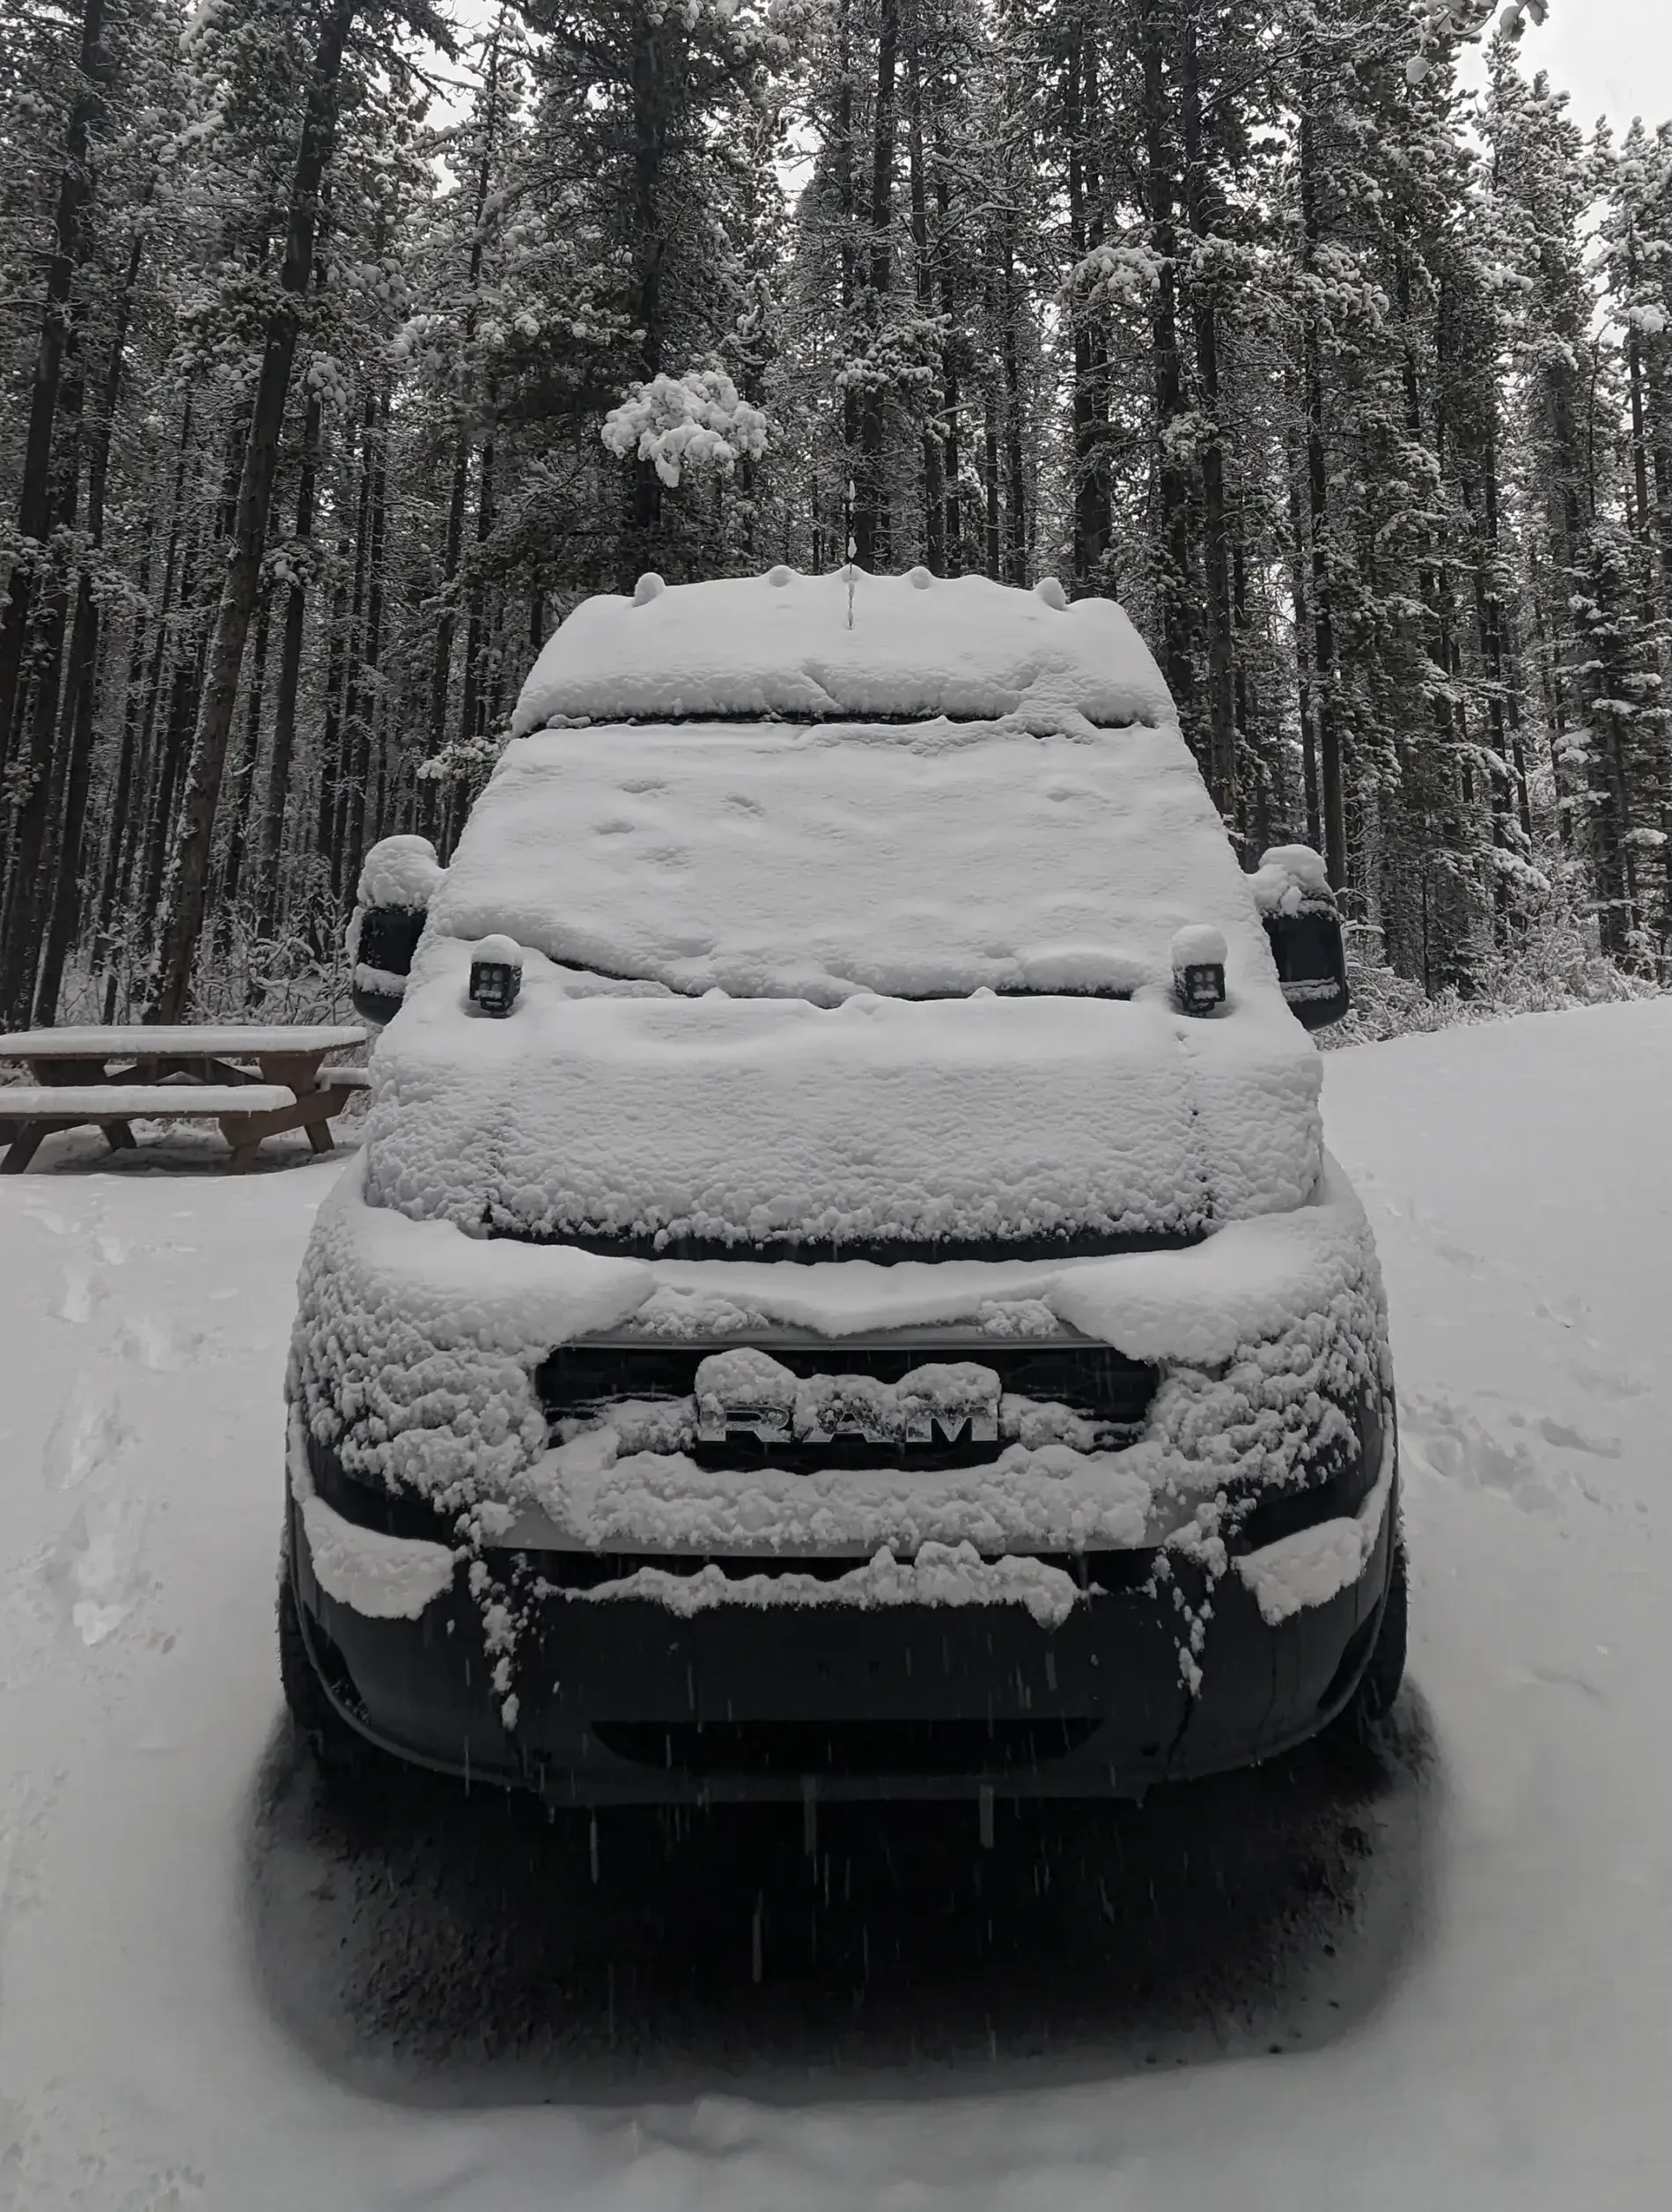 Solar Power In The Winter - Surviving Van Life Winters Off The Grid